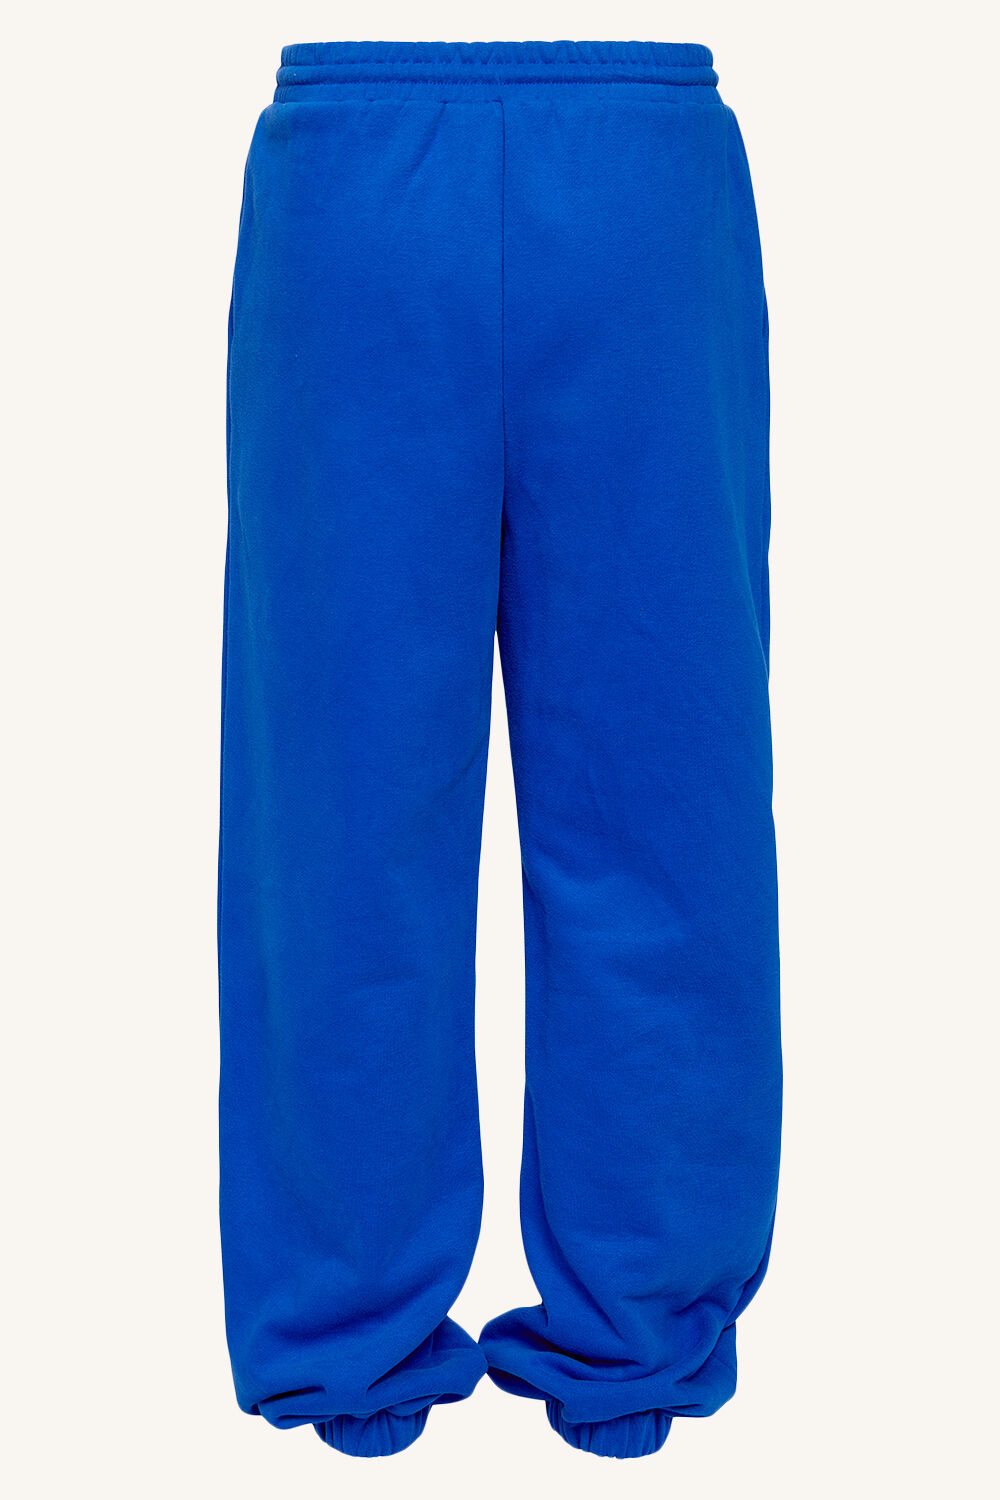 TRACK SWEAT PANT in colour DAZZLING BLUE